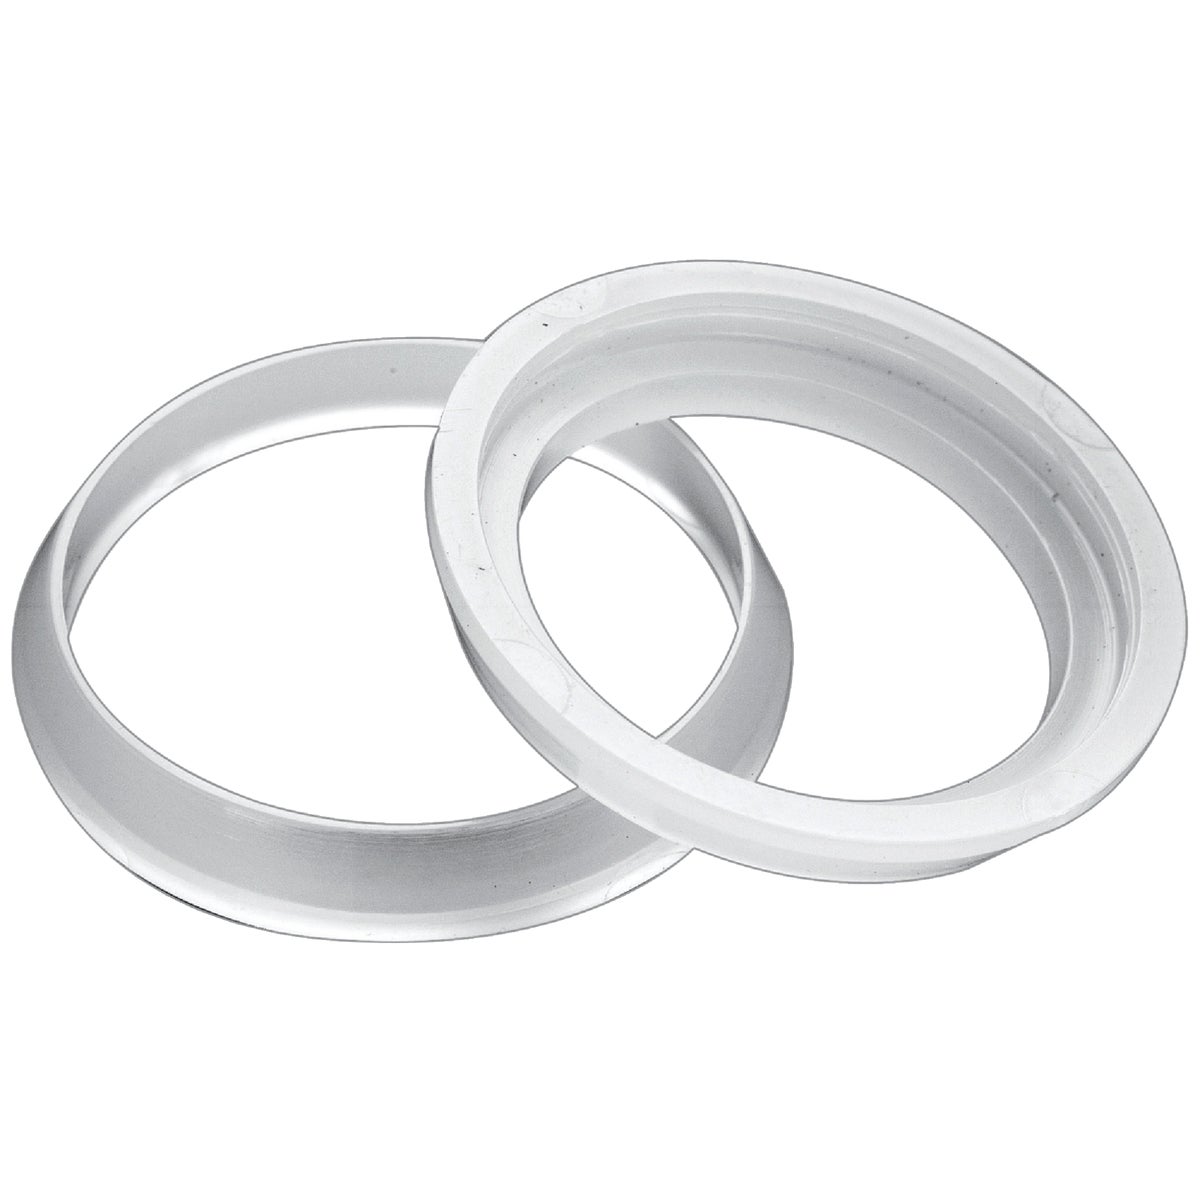 Do it 1-1/2 In. x 1-1/2 In. Clear Poly Slip Joint Washer (2-Pack)